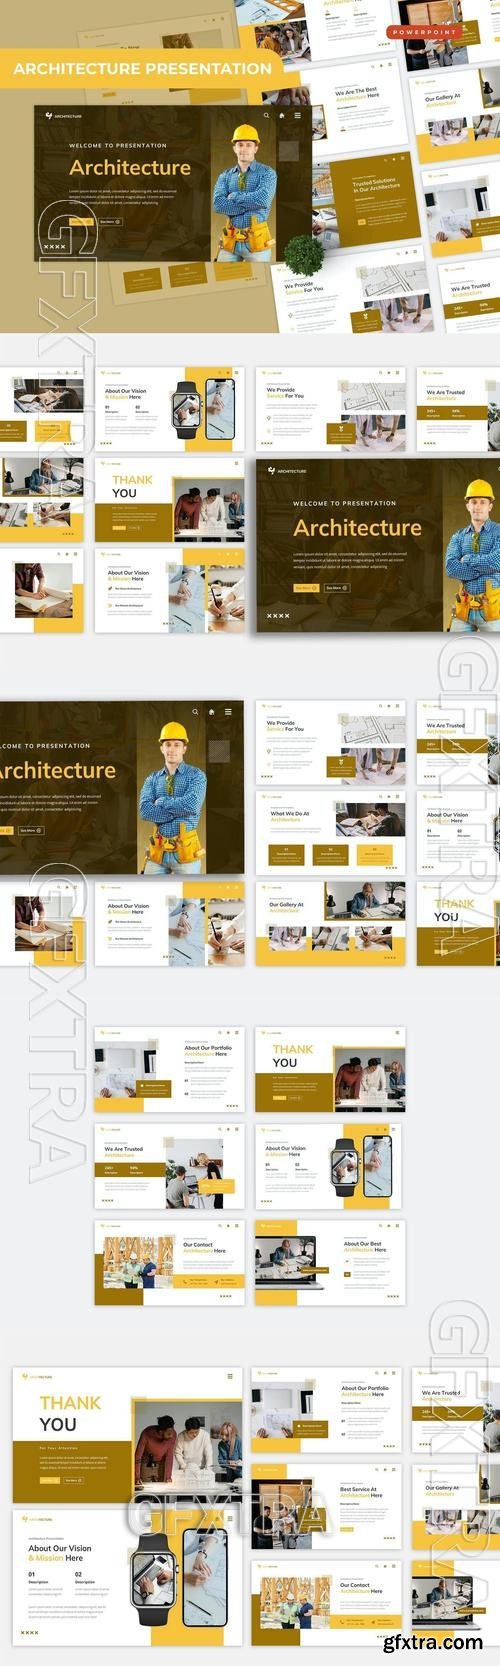 Architecture Powerpoint Template G6WA94S